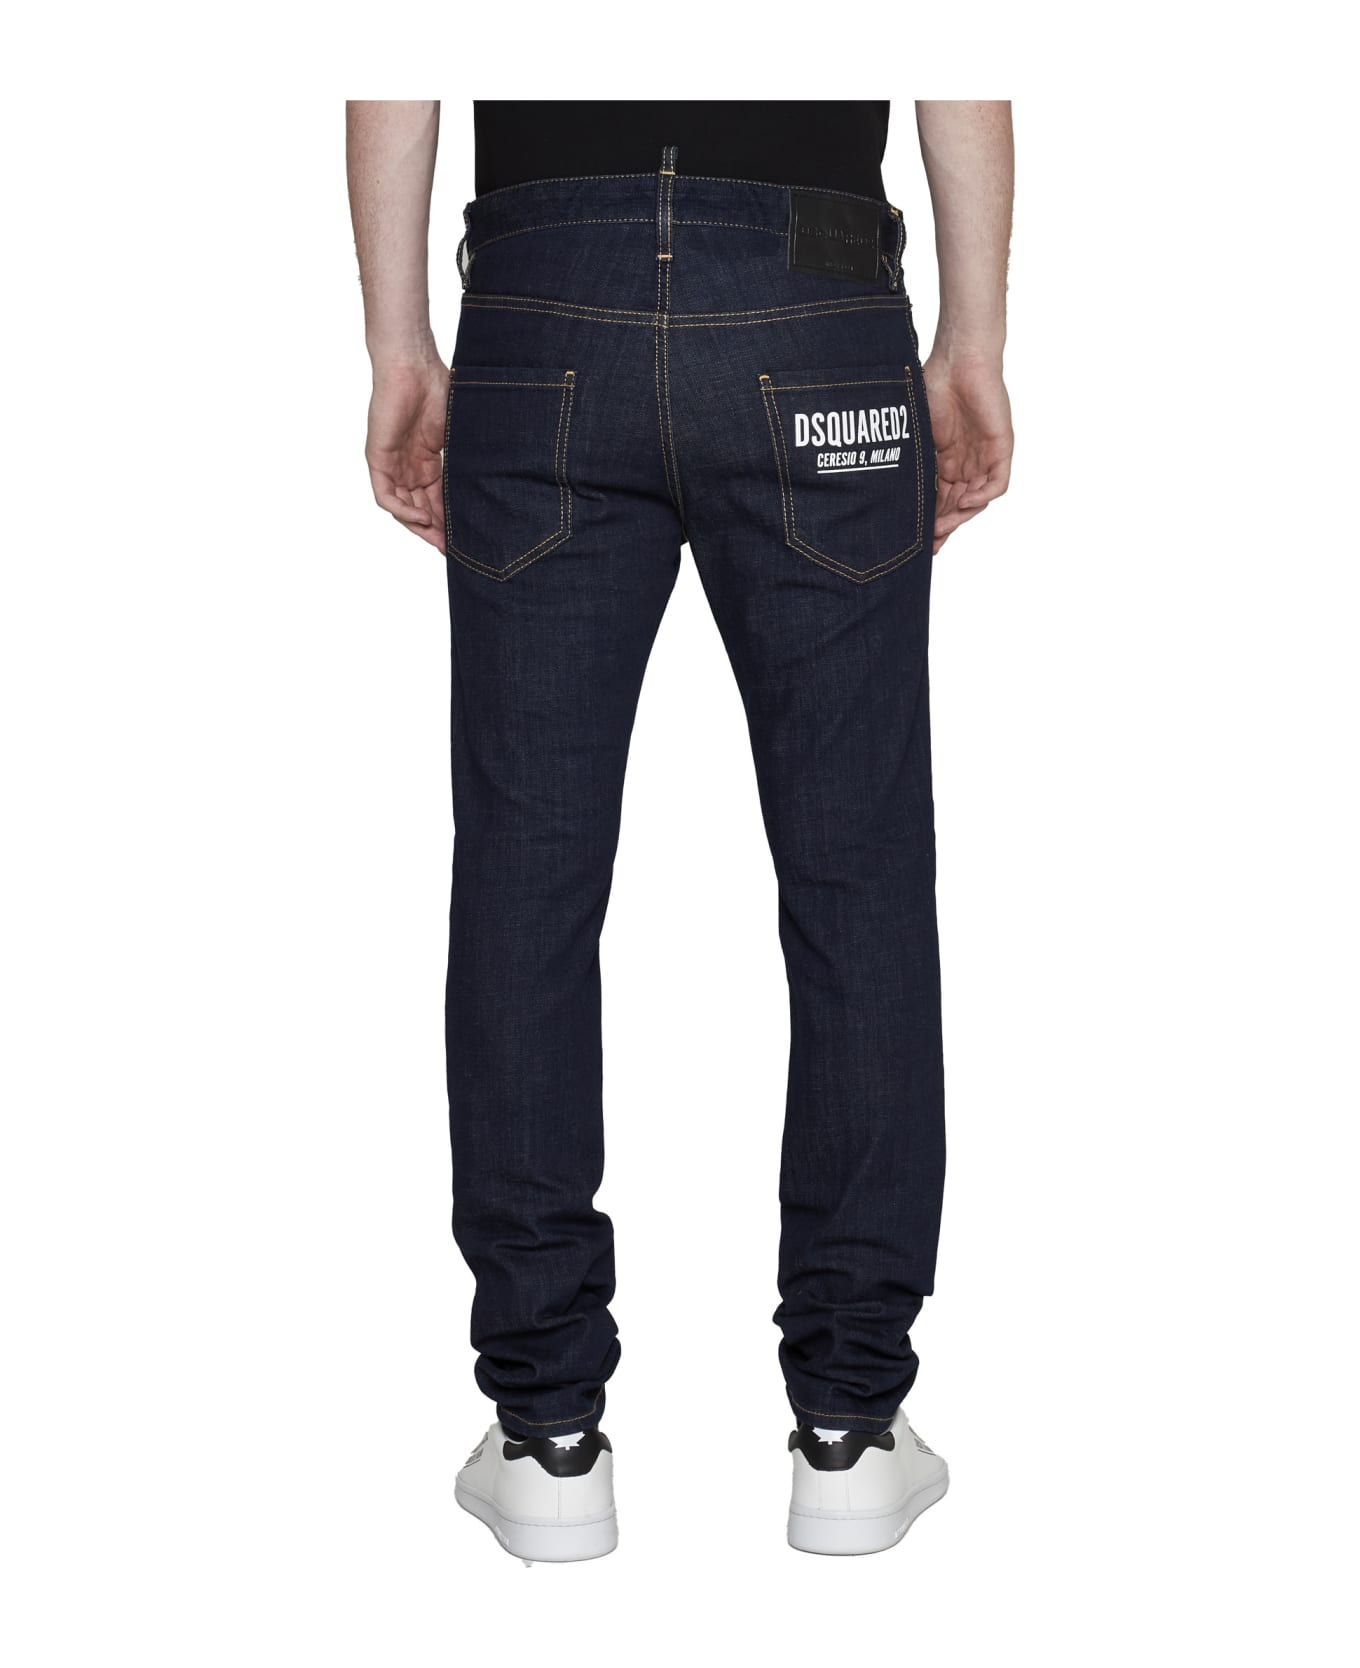 Dsquared2 Cool Guy Jeans In Dark Rinse Wash - Blue Navy デニム